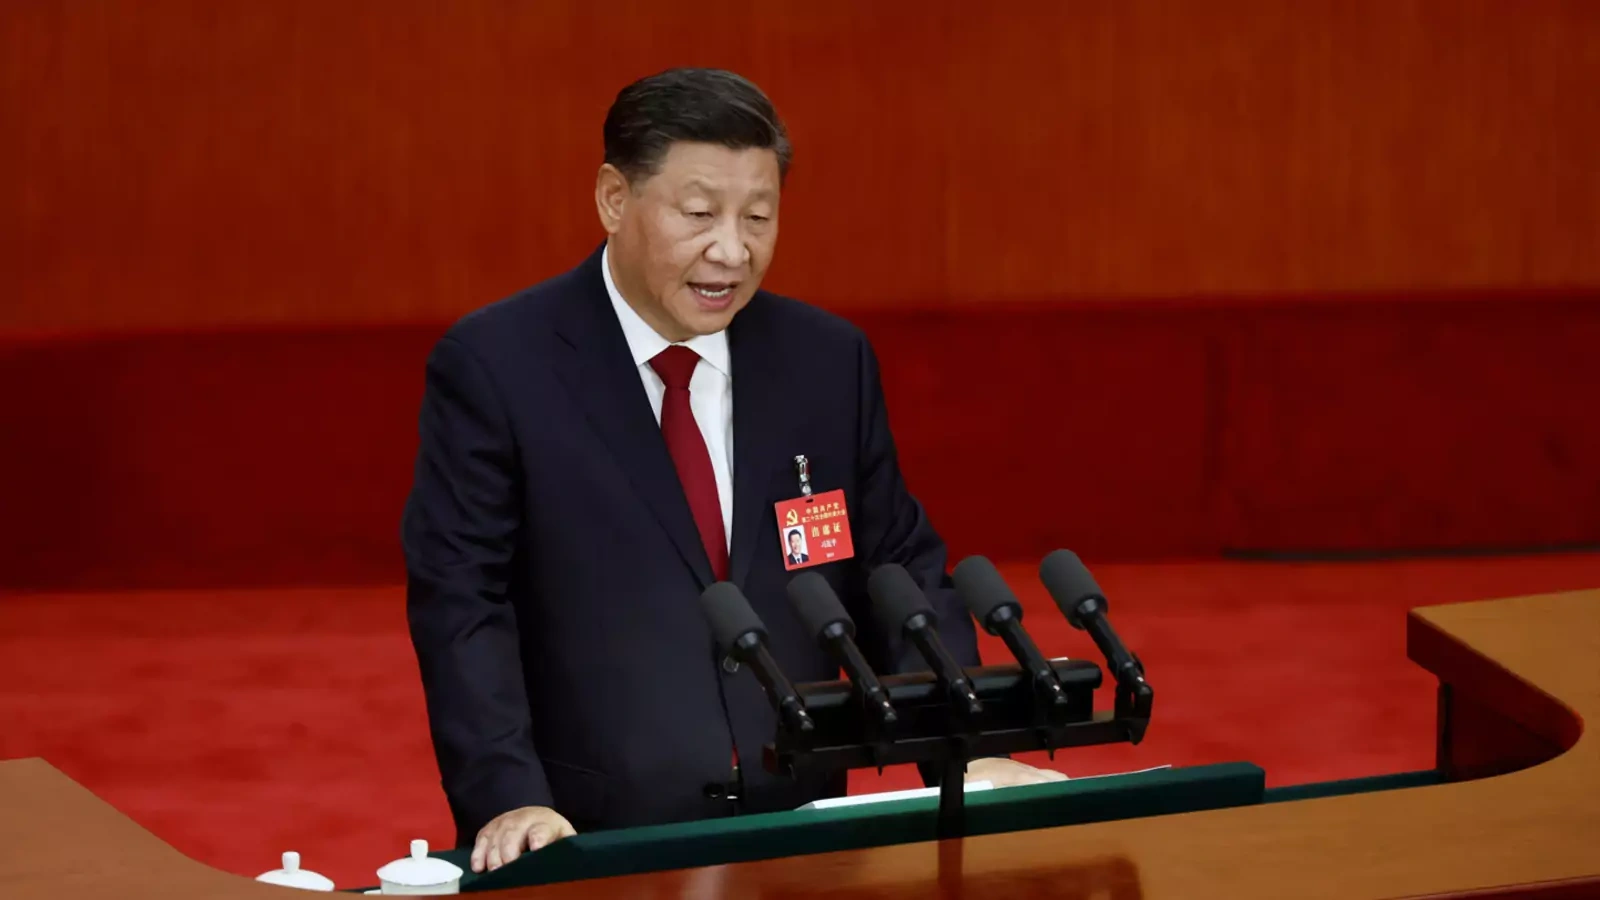 Chinese President Xi Jinping speaks during the opening ceremony of the 20th National Congress of the Communist Party of China, at the Great Hall of the People in Beijing, China October 16, 2022.